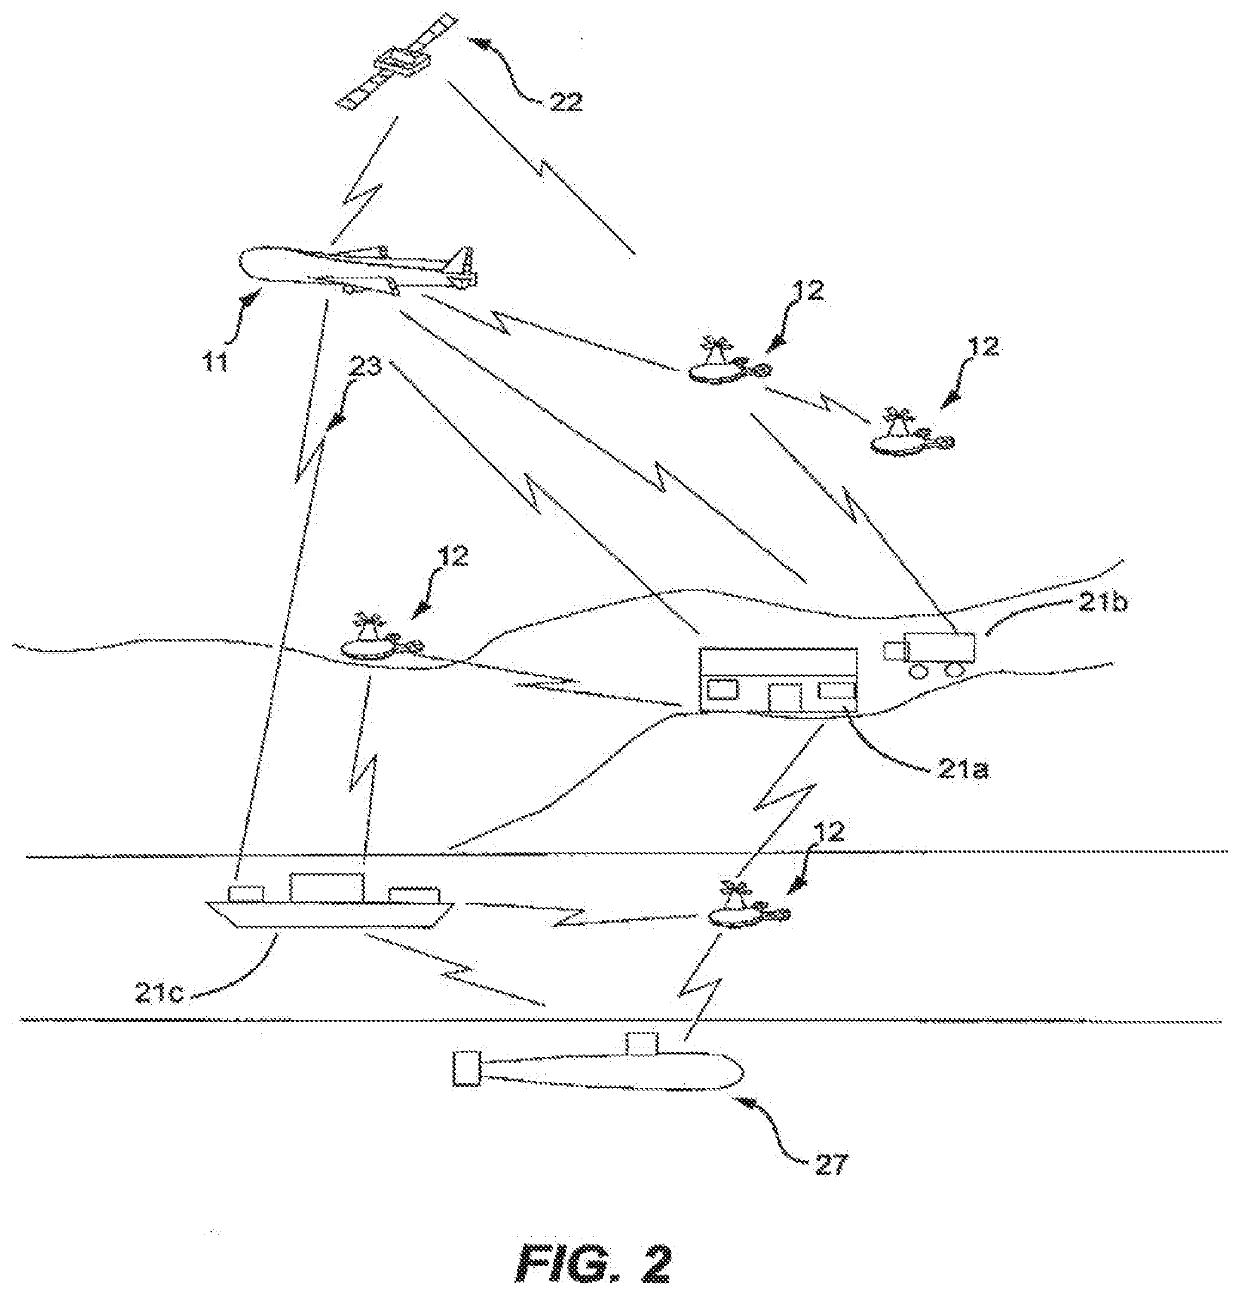 Combination of unmanned aerial vehicles and the method and system to engage in multiple applications